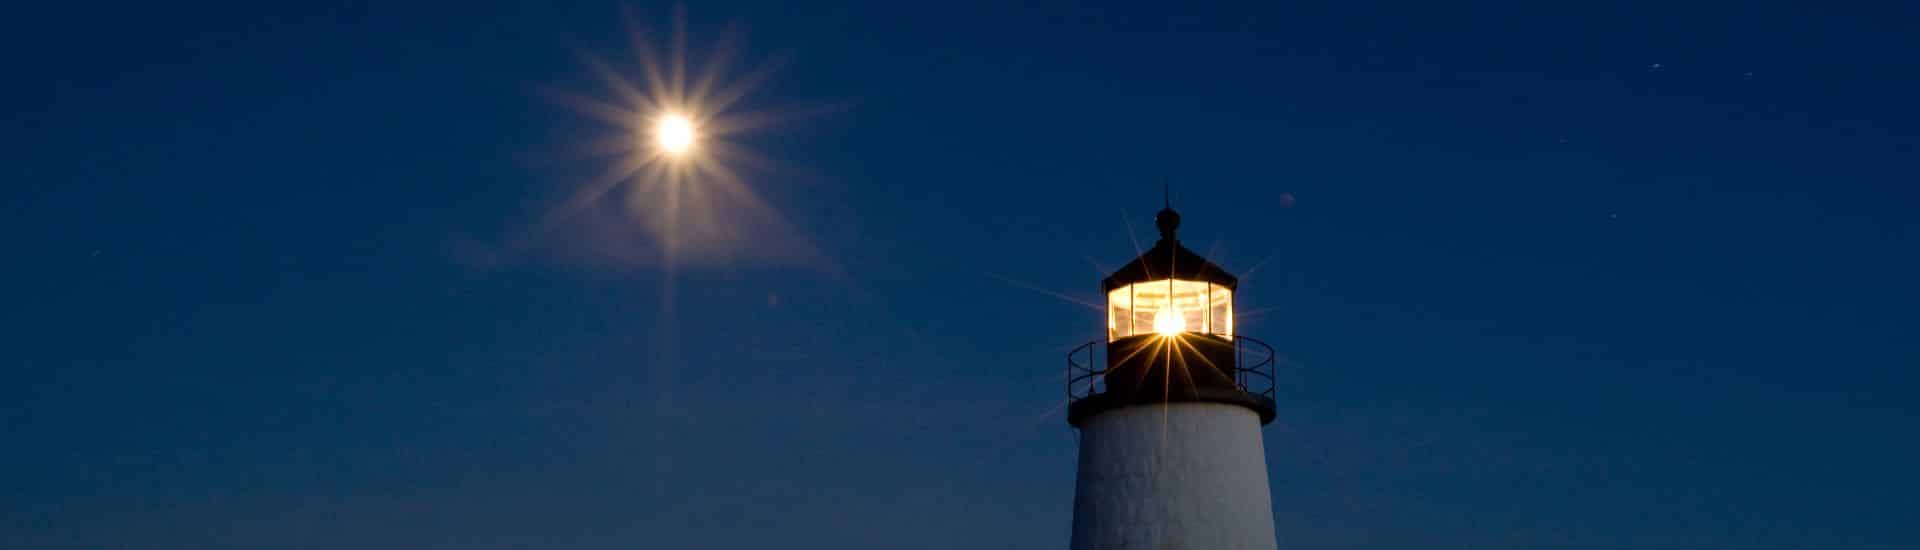 Top of a lighted lighthouse at night with moon shining in the sky